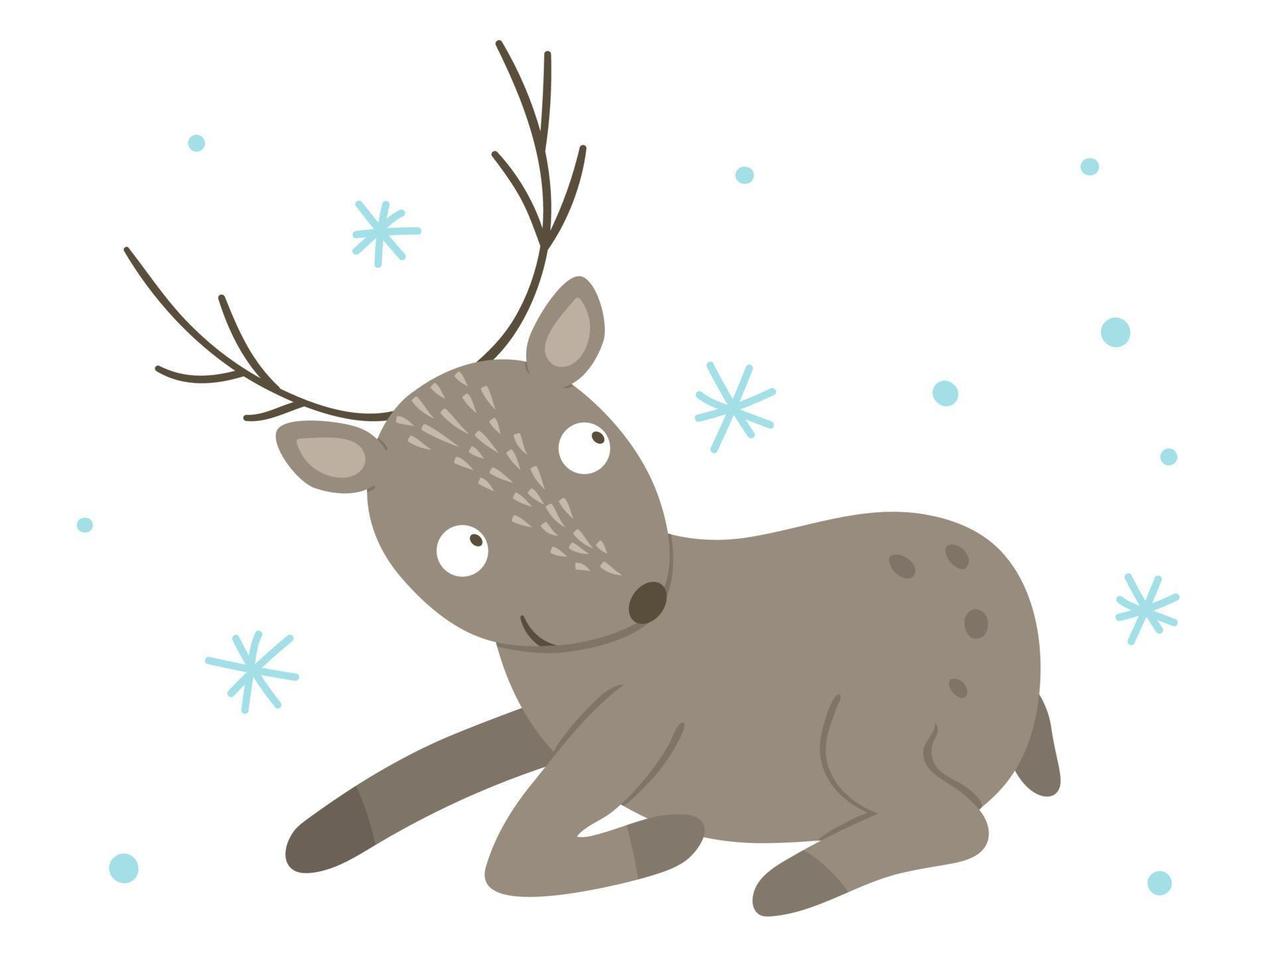 Vector hand drawn flat deer with snowflakes. Funny winter scene with woodland animal. Cute forest animalistic illustration for print, stationery